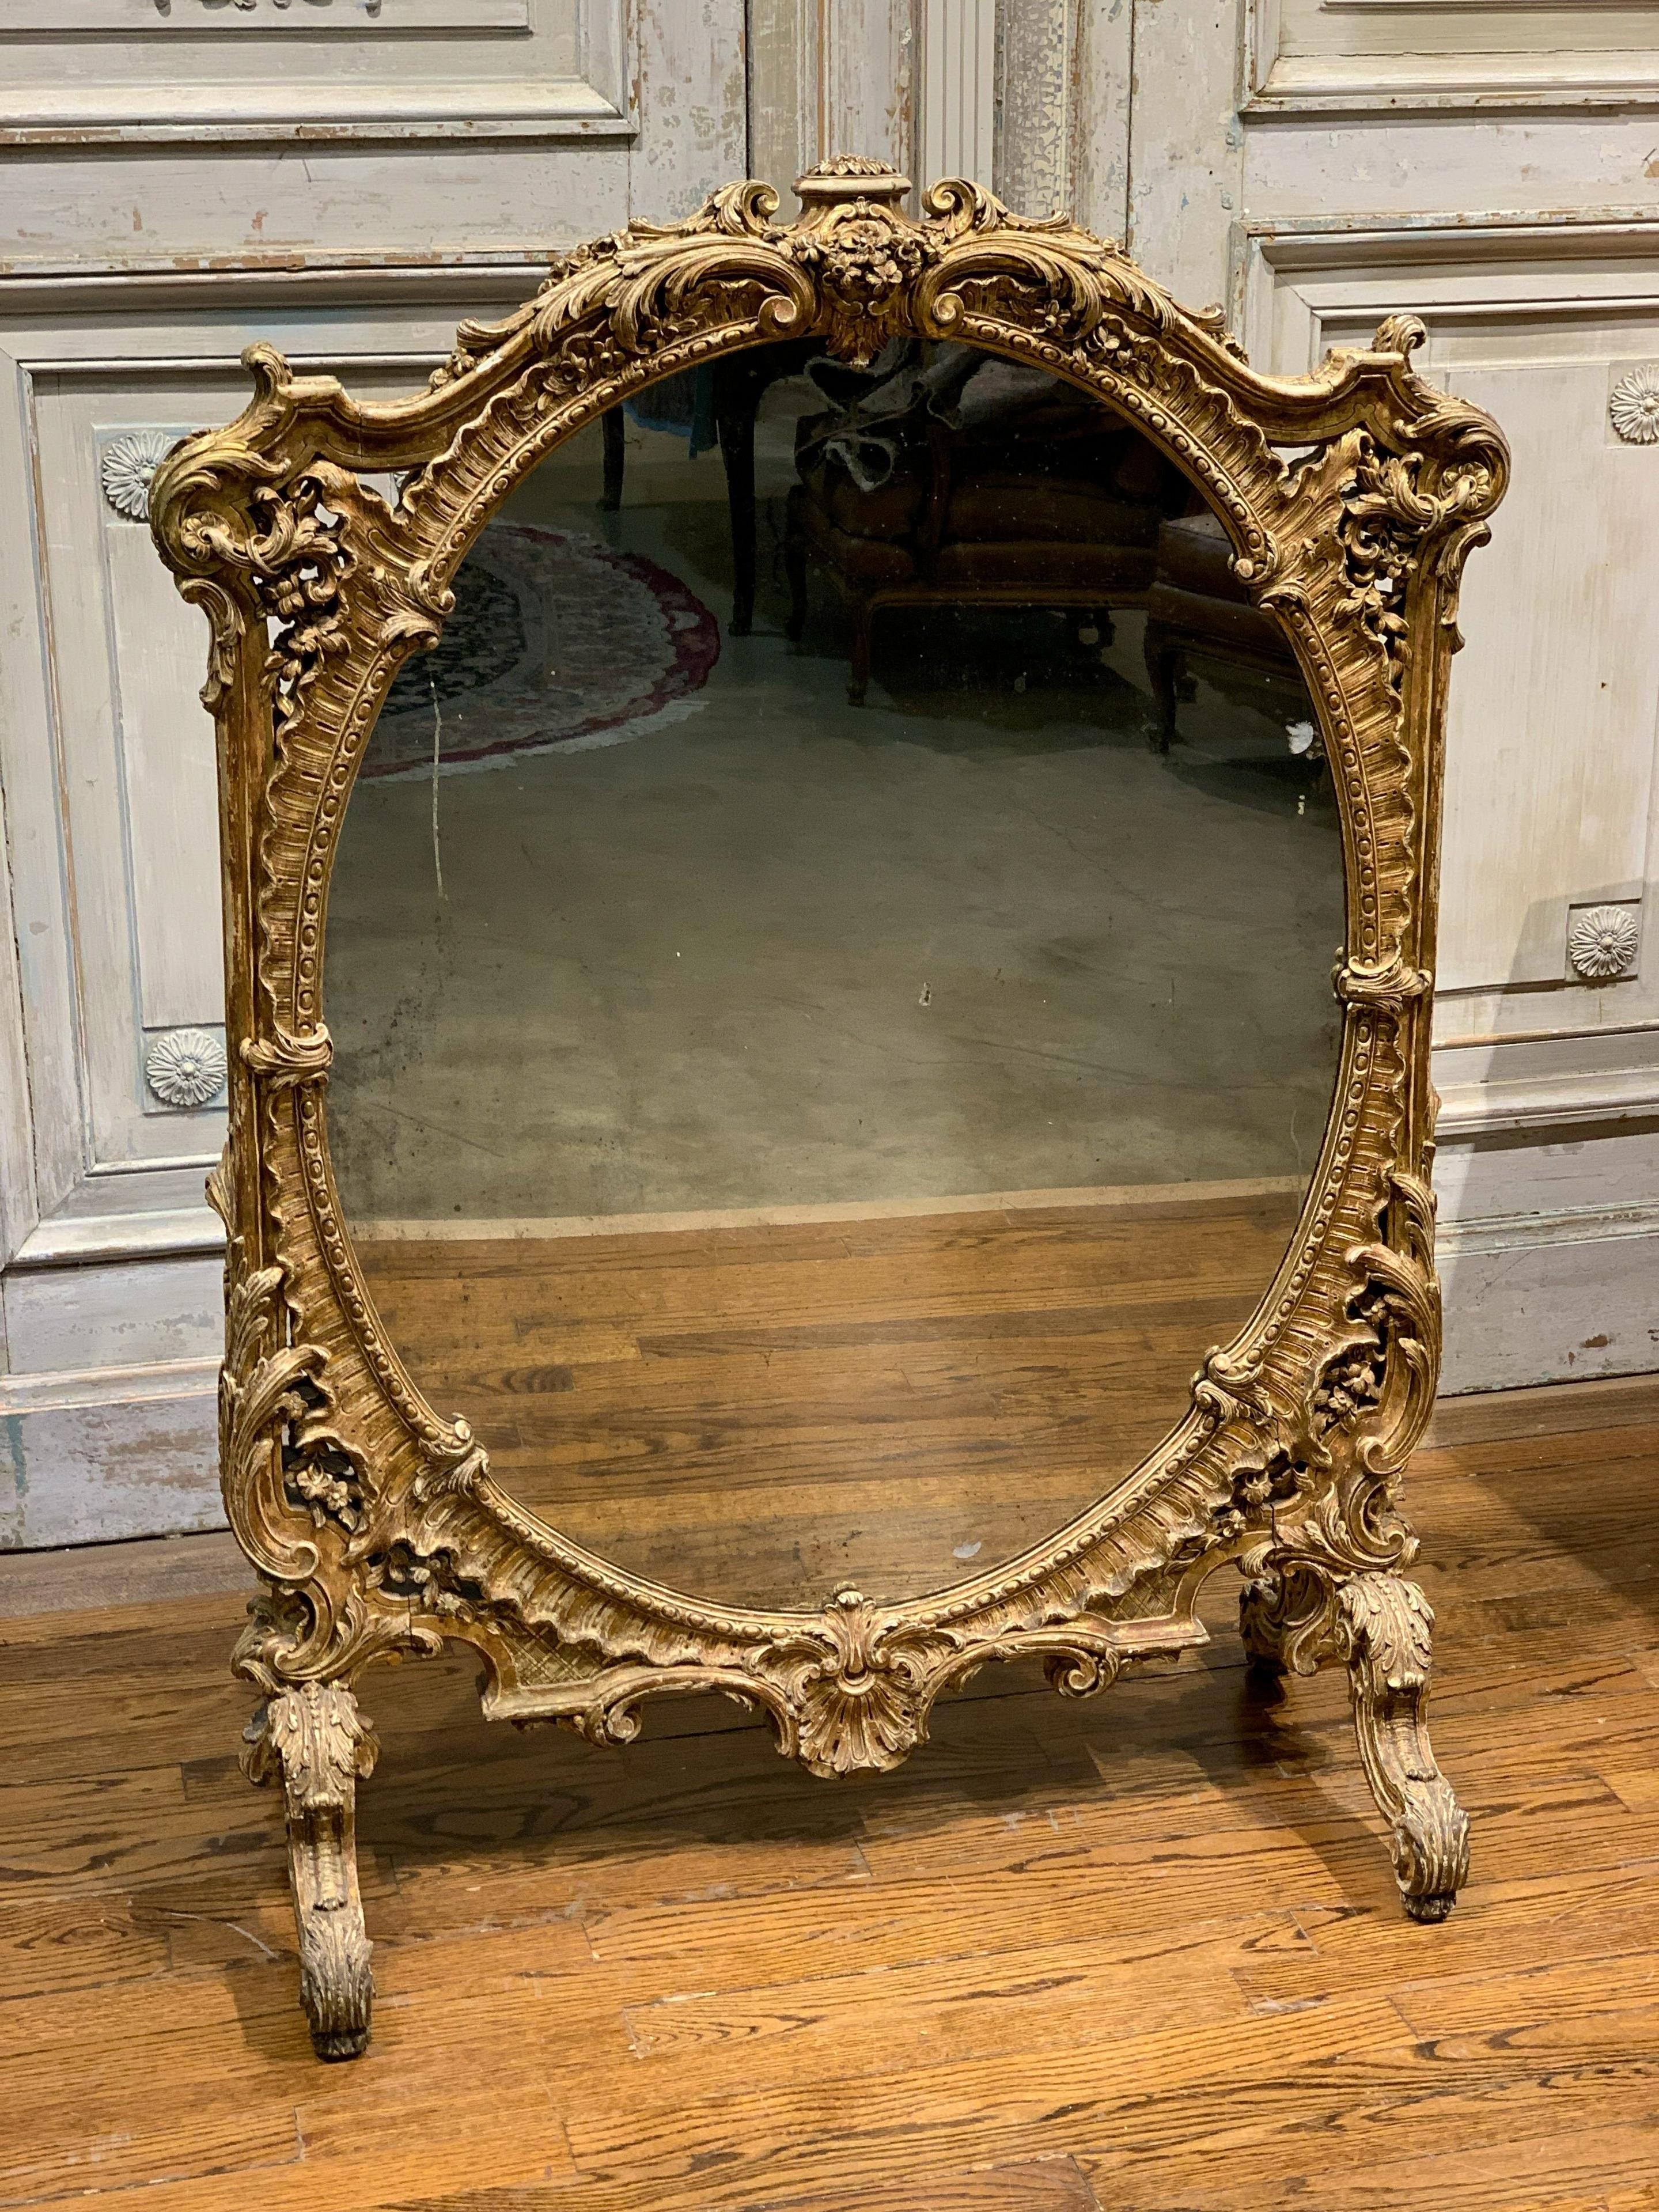 Very large French Louis XV style giltwood mirrored fire screen with the finest quality carving after a 18th century model.